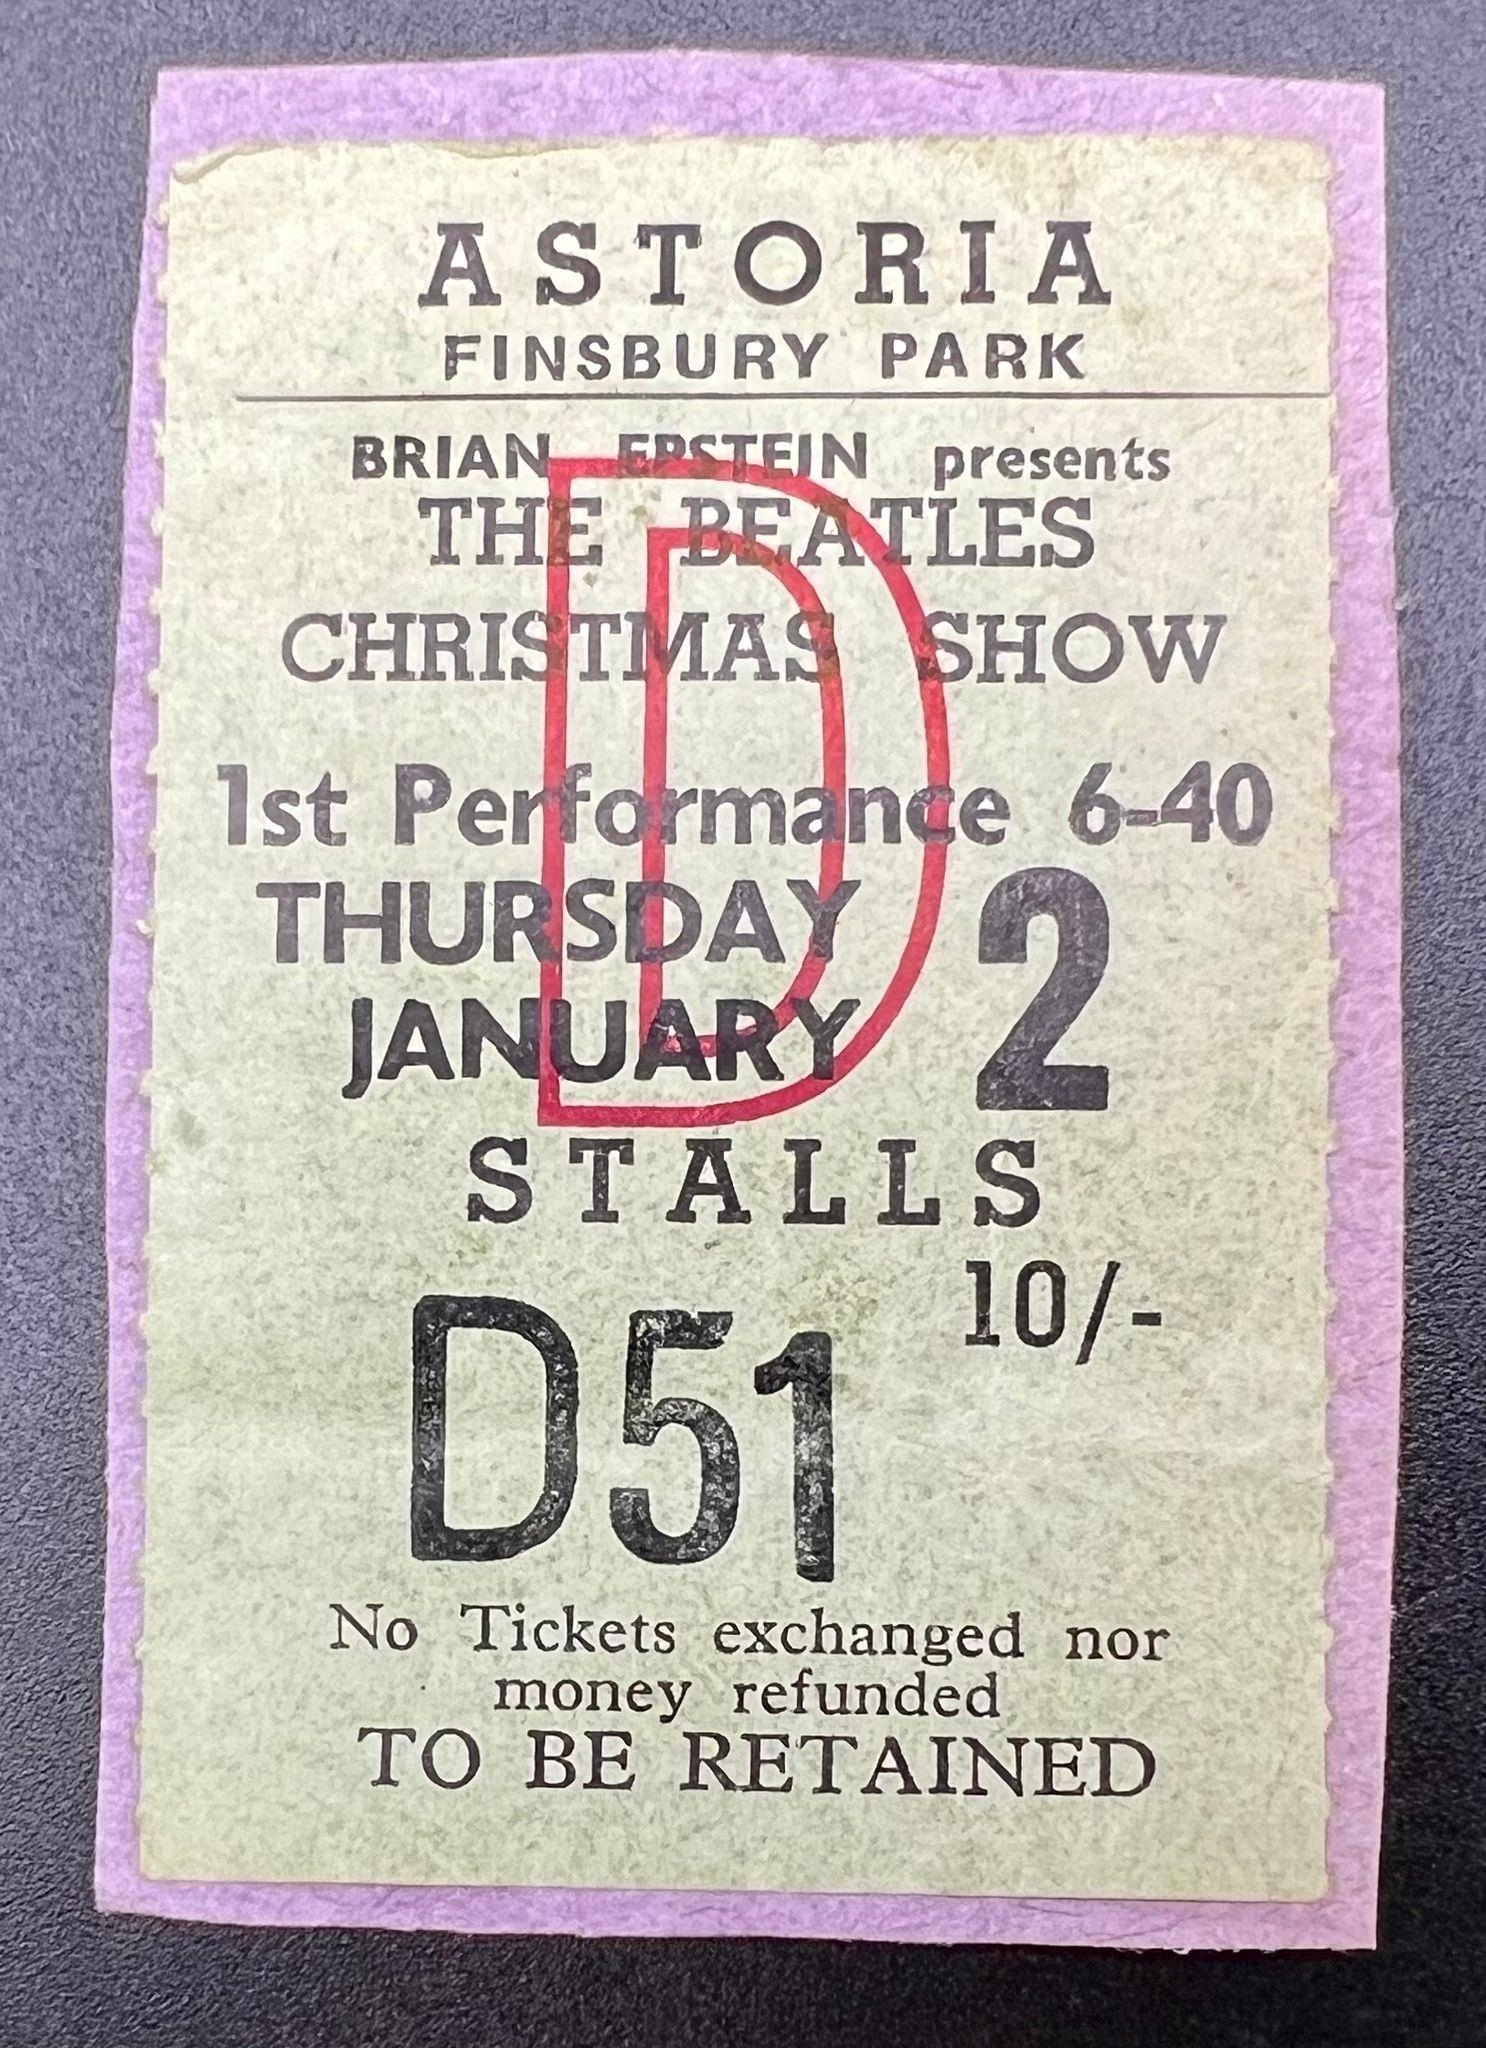 The BEATLES Christmas show programme and ticket from Thursday, January 2nd at the Astoria, - Image 3 of 6